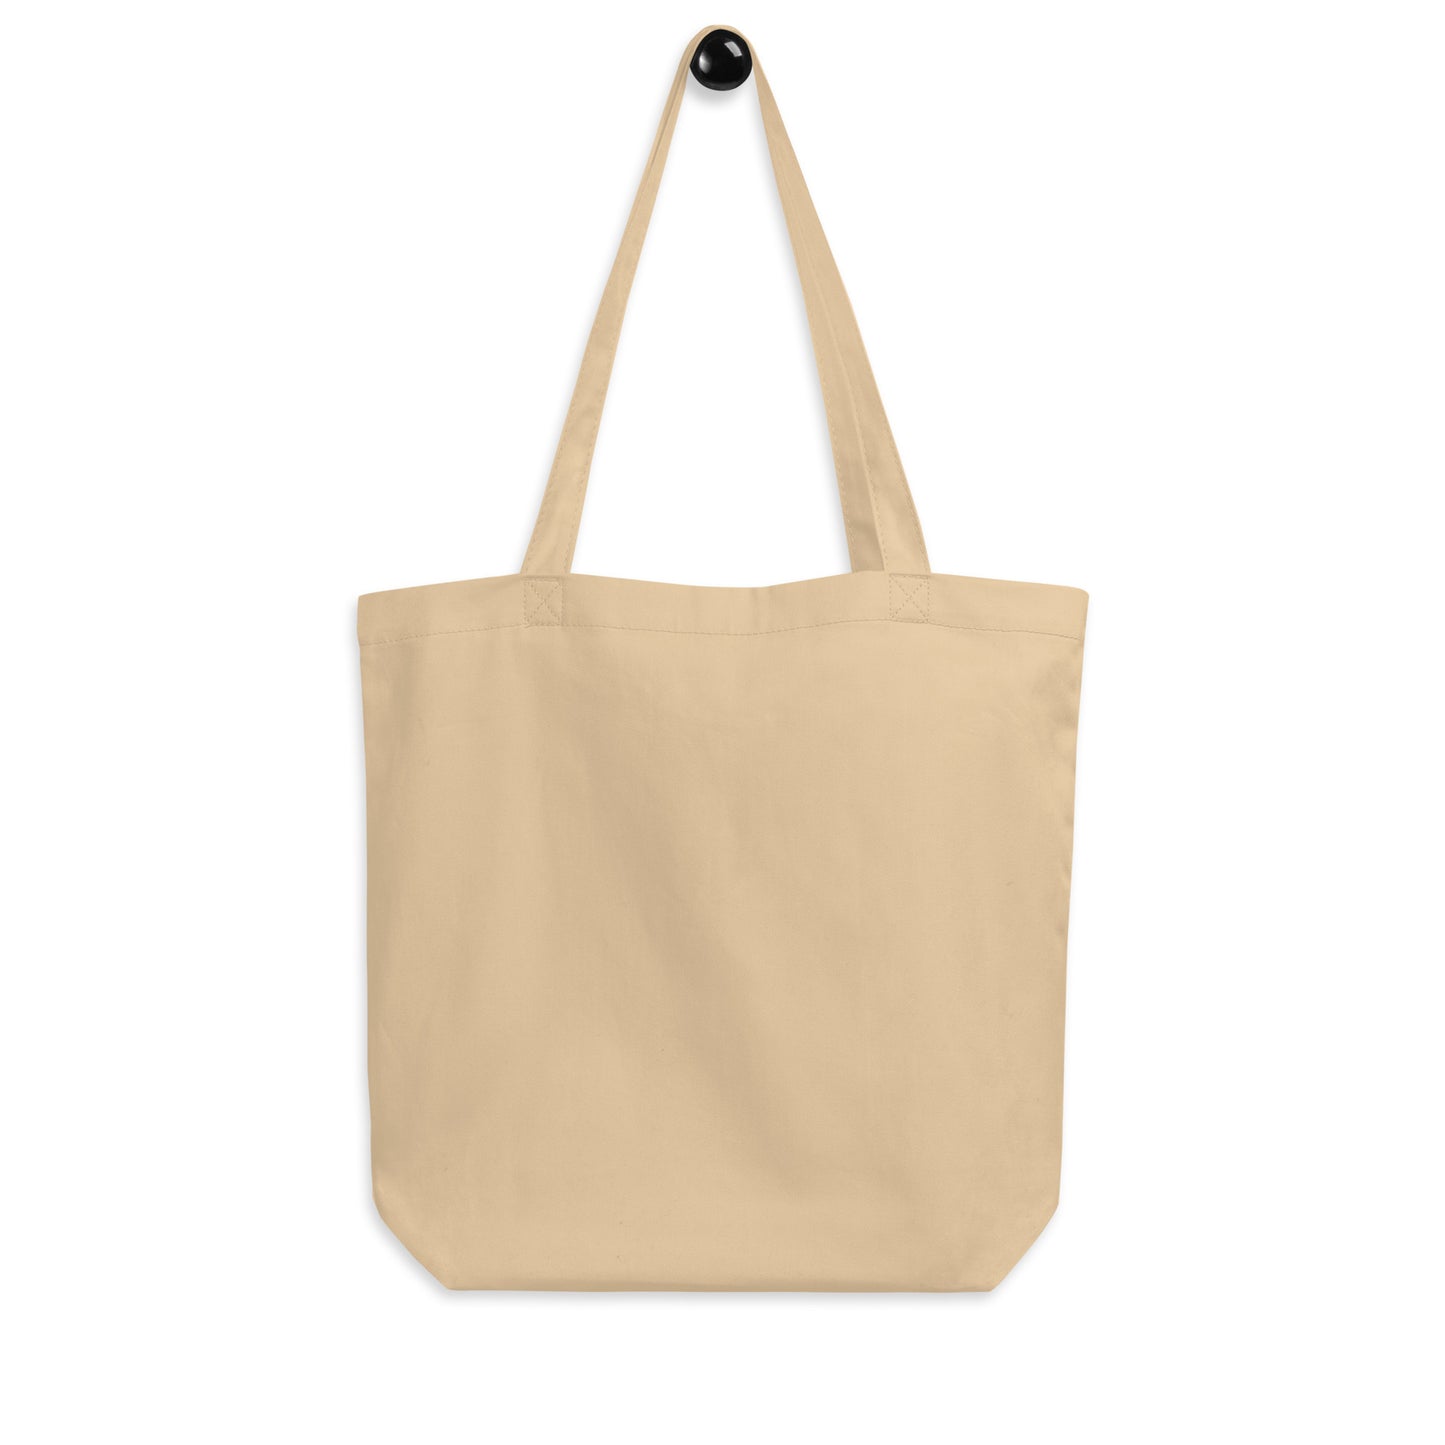 Aviation Gift Organic Tote - Black • CPT Cape Town • YHM Designs - Image 05